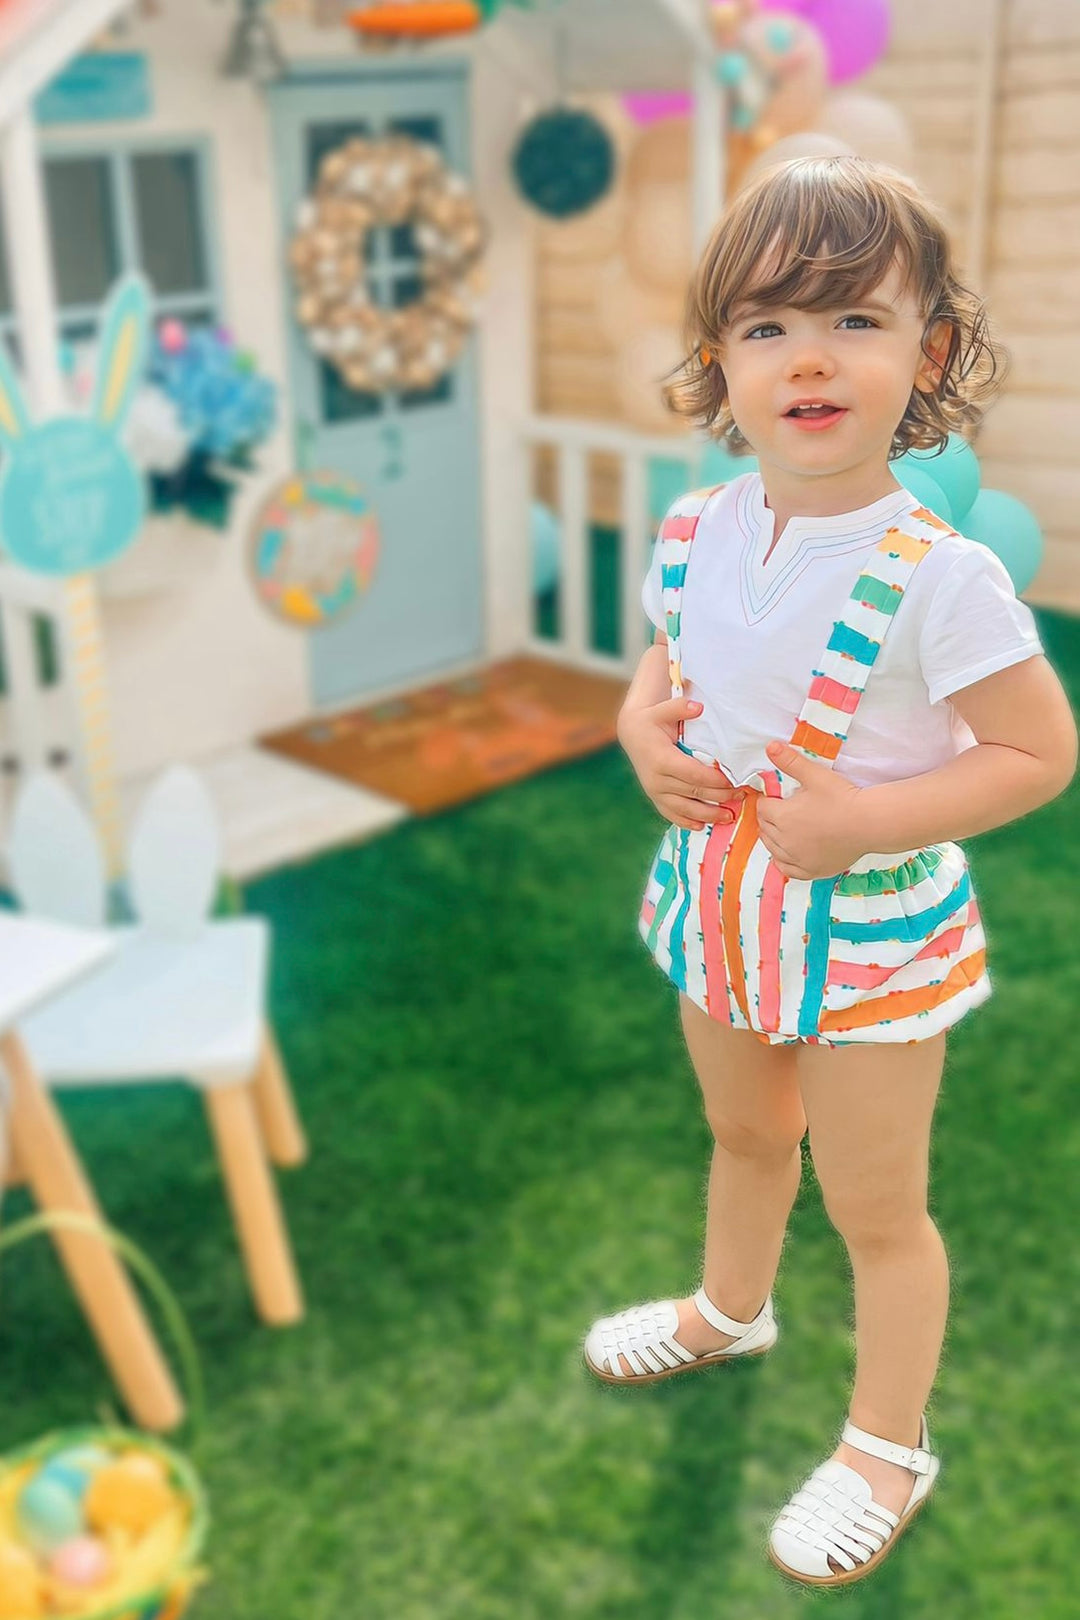 José Varón "Maddox" Multicoloured Striped Shirt & Dungaree Romper | iphoneandroidapplications